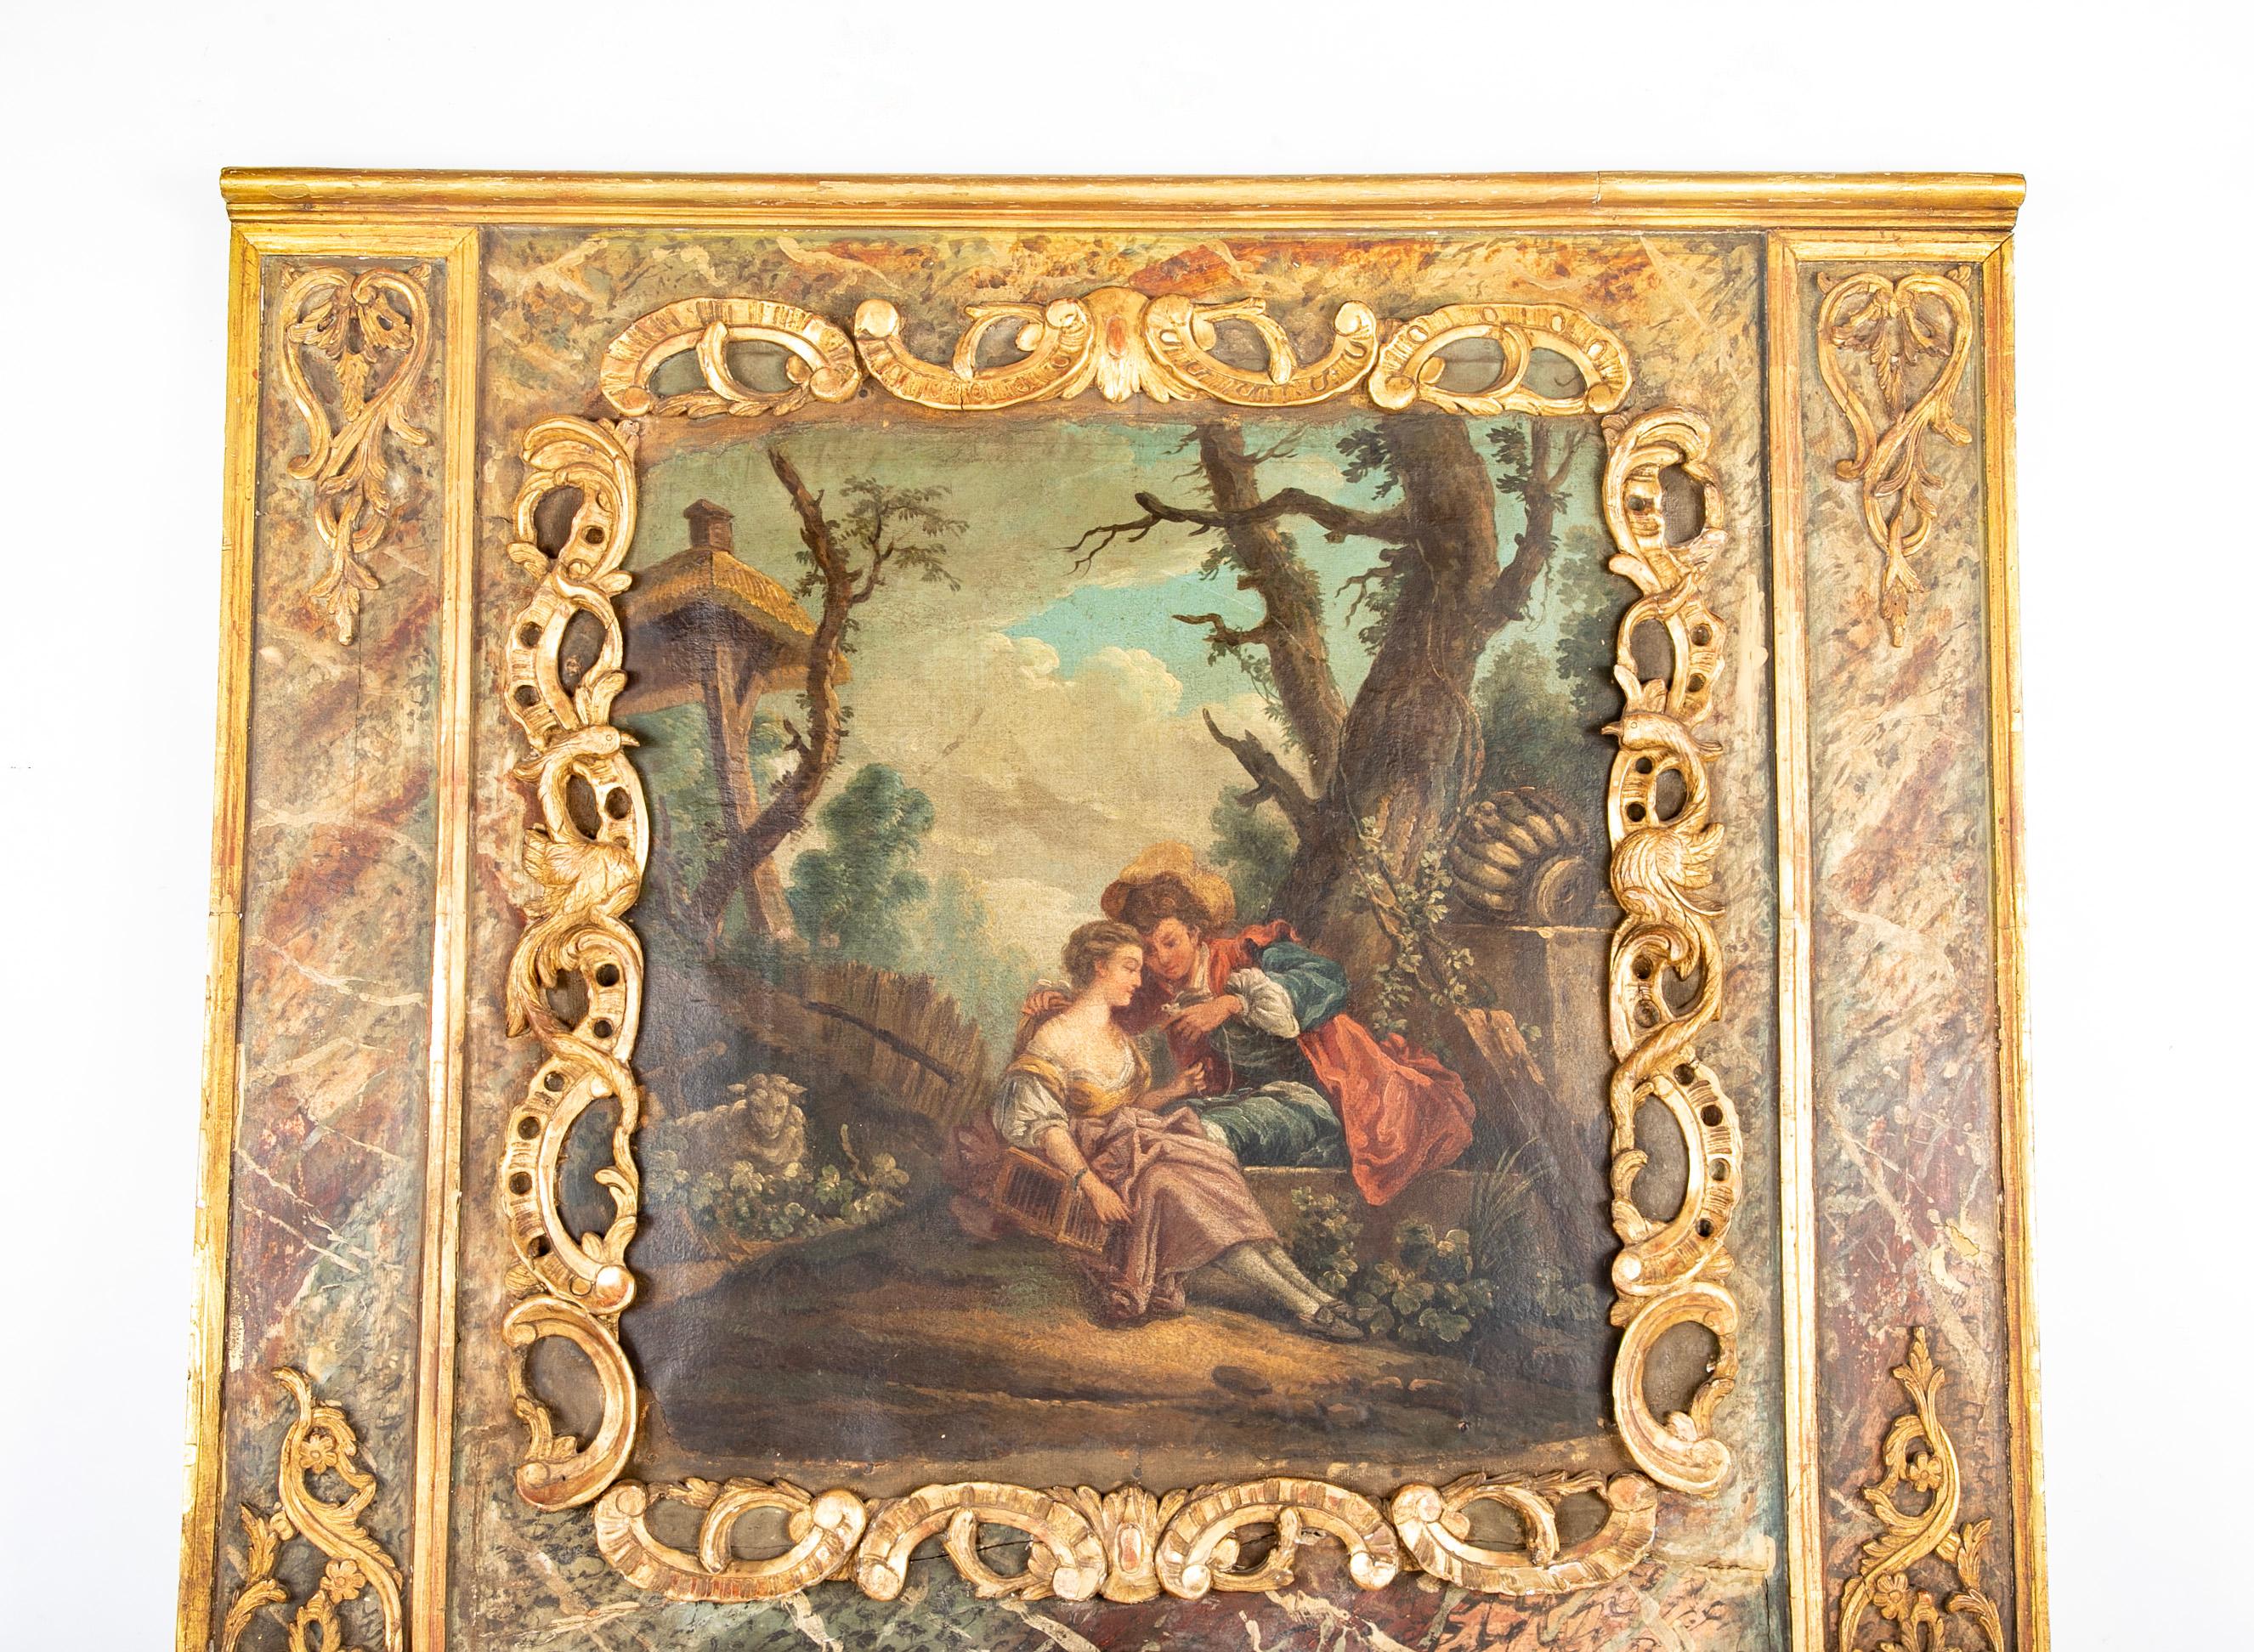 Late 18th Century French trumeau mirror with gilt carvings, rare faux marbelizing and romantic painting.